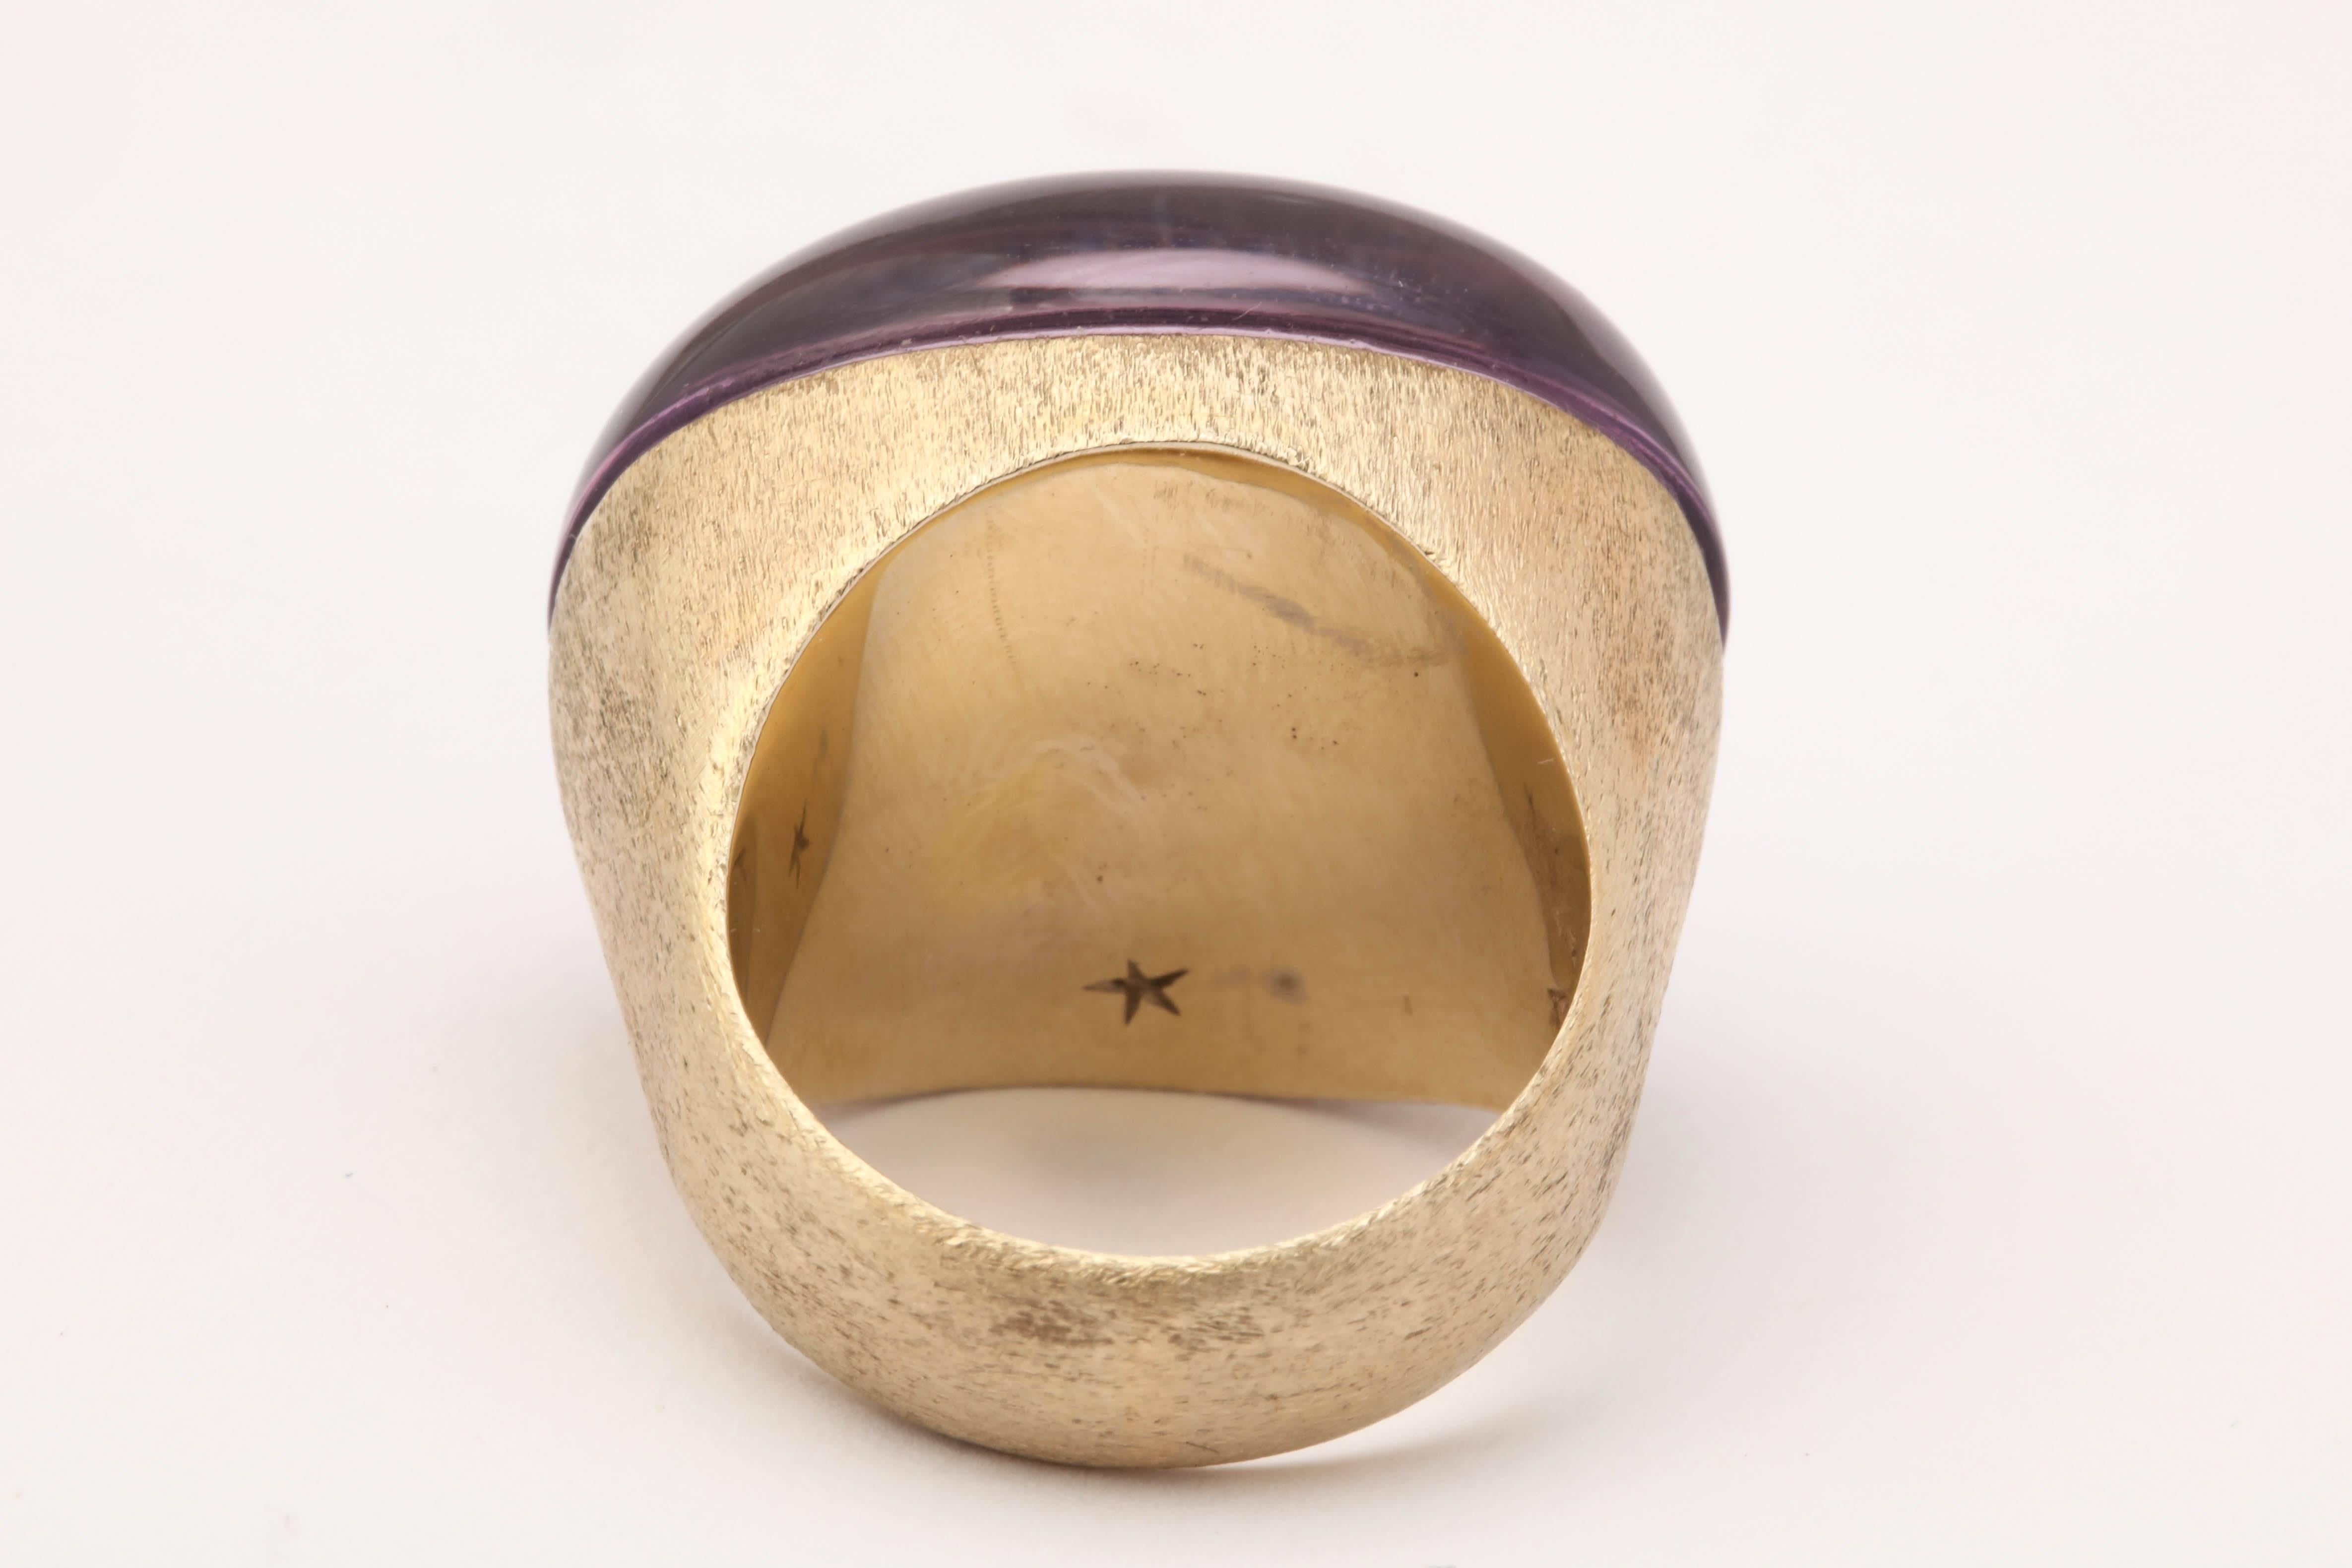 H.Stern 1990's Large Cabochon Amethyst Brushed Gold Cocktail Ring 2